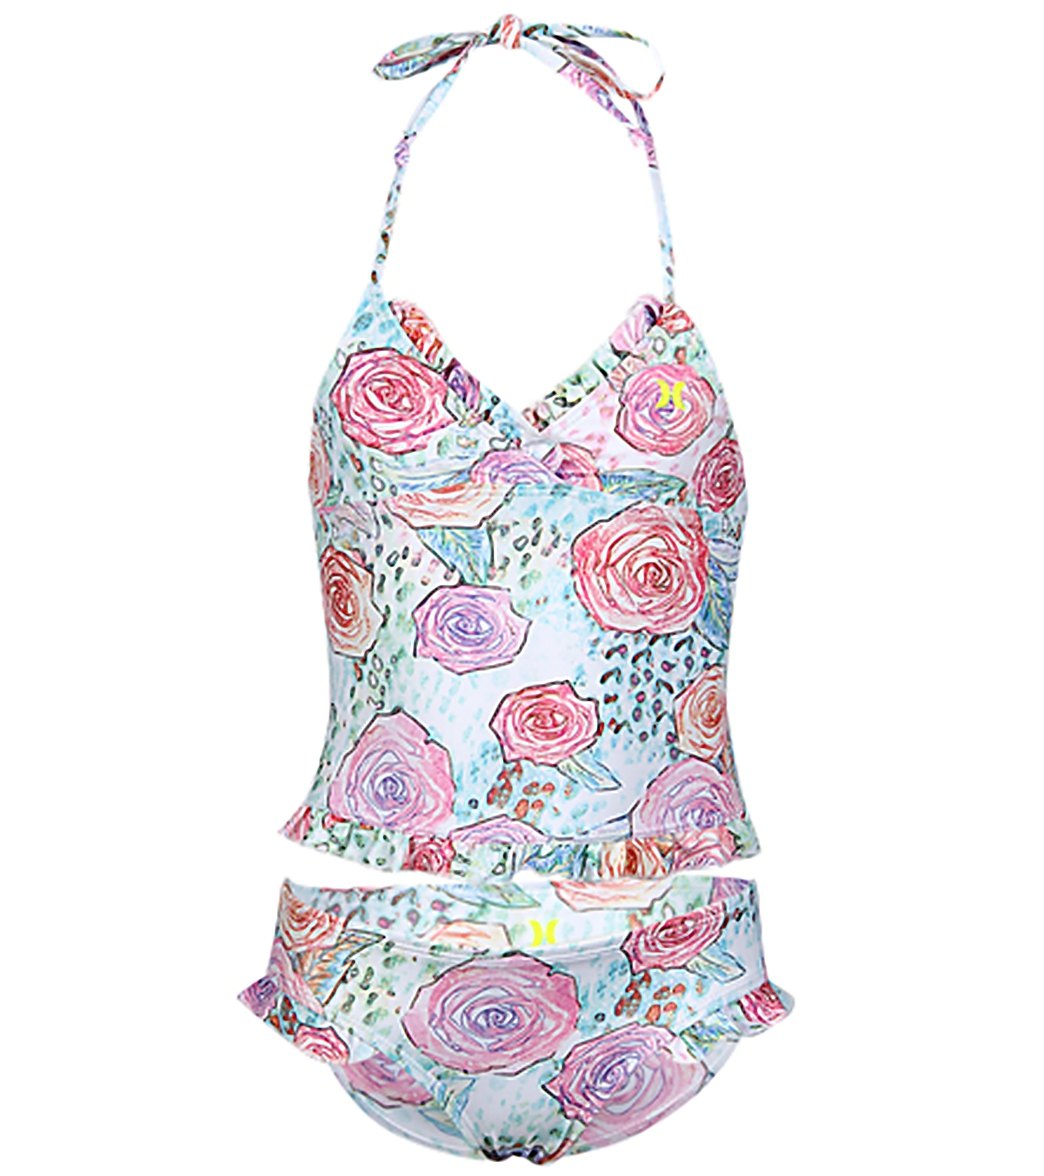 Hurley Little Girls' Every Rose Tankini Set (4-6X) at SwimOutlet.com